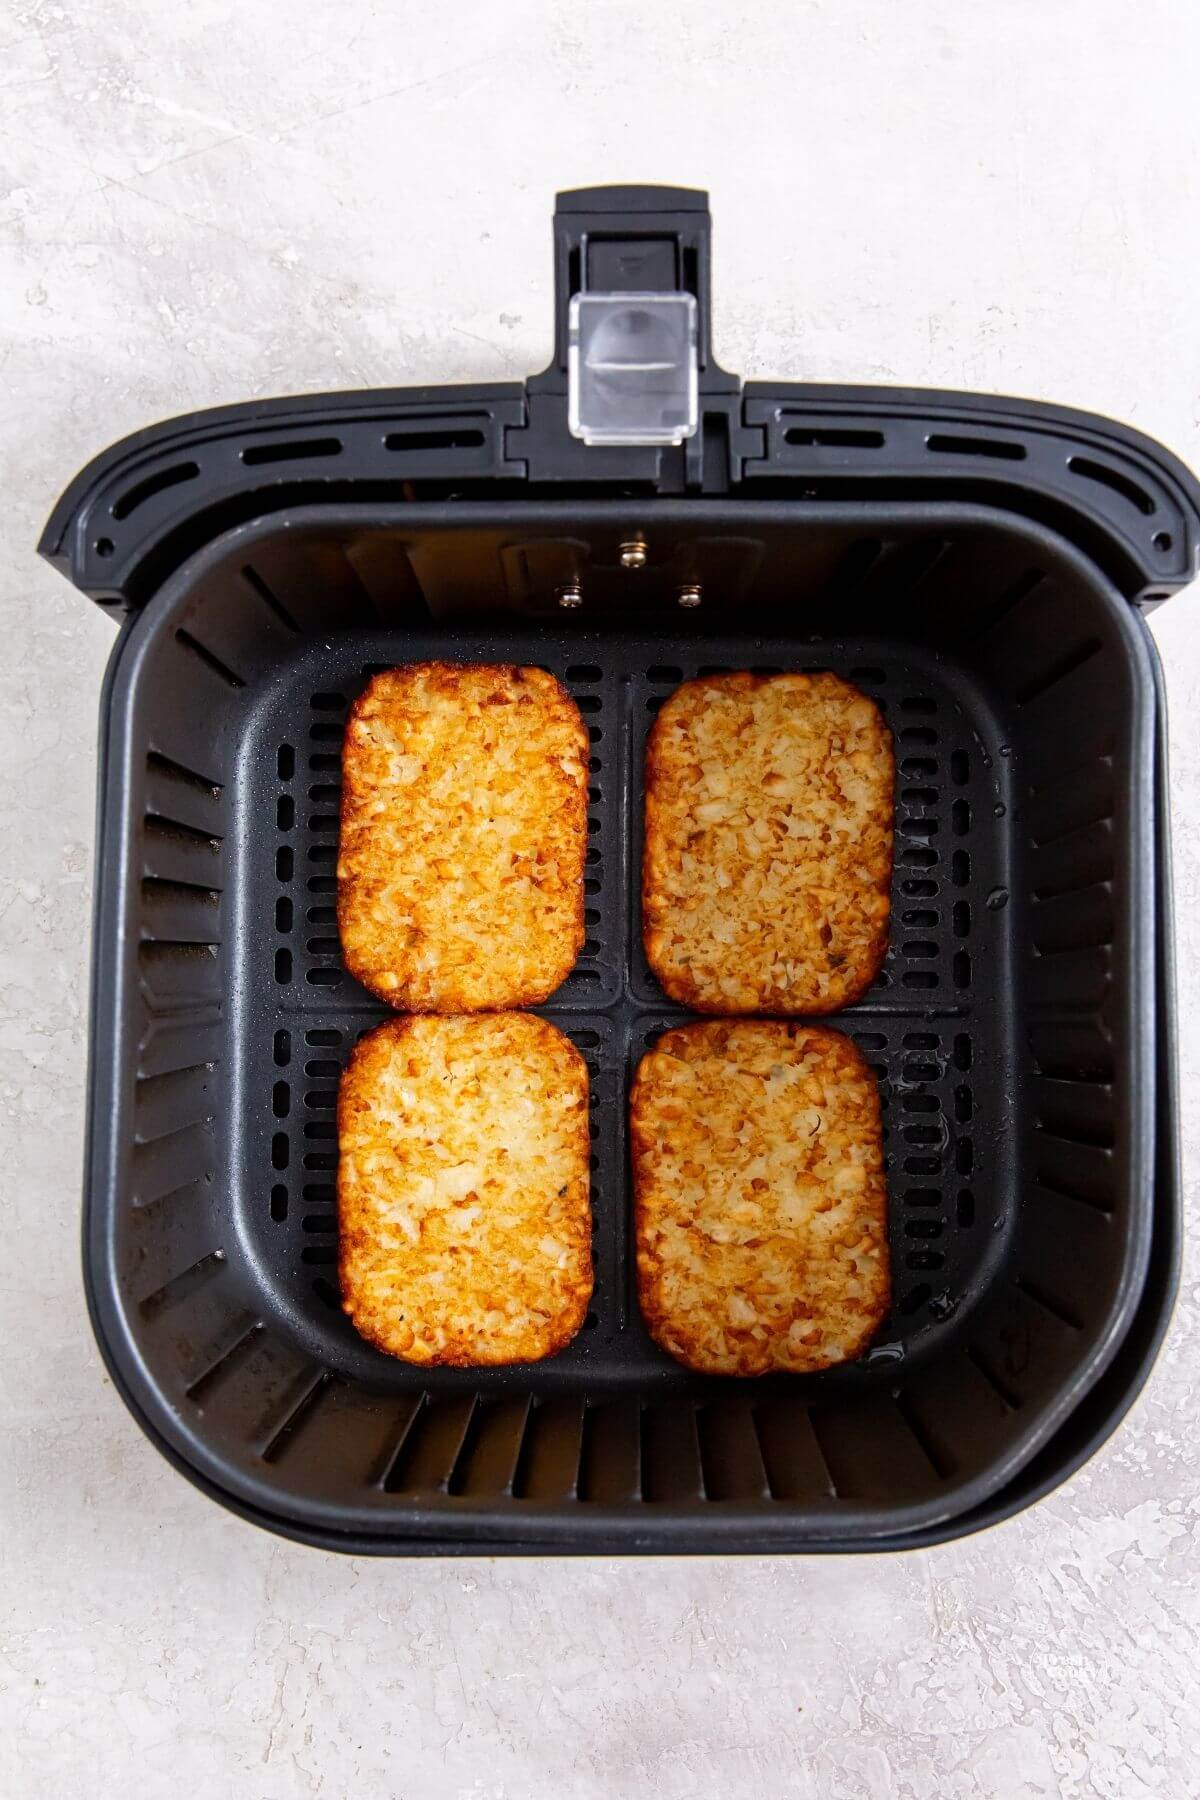 Place hash browns in air fryer, don't crowd them.